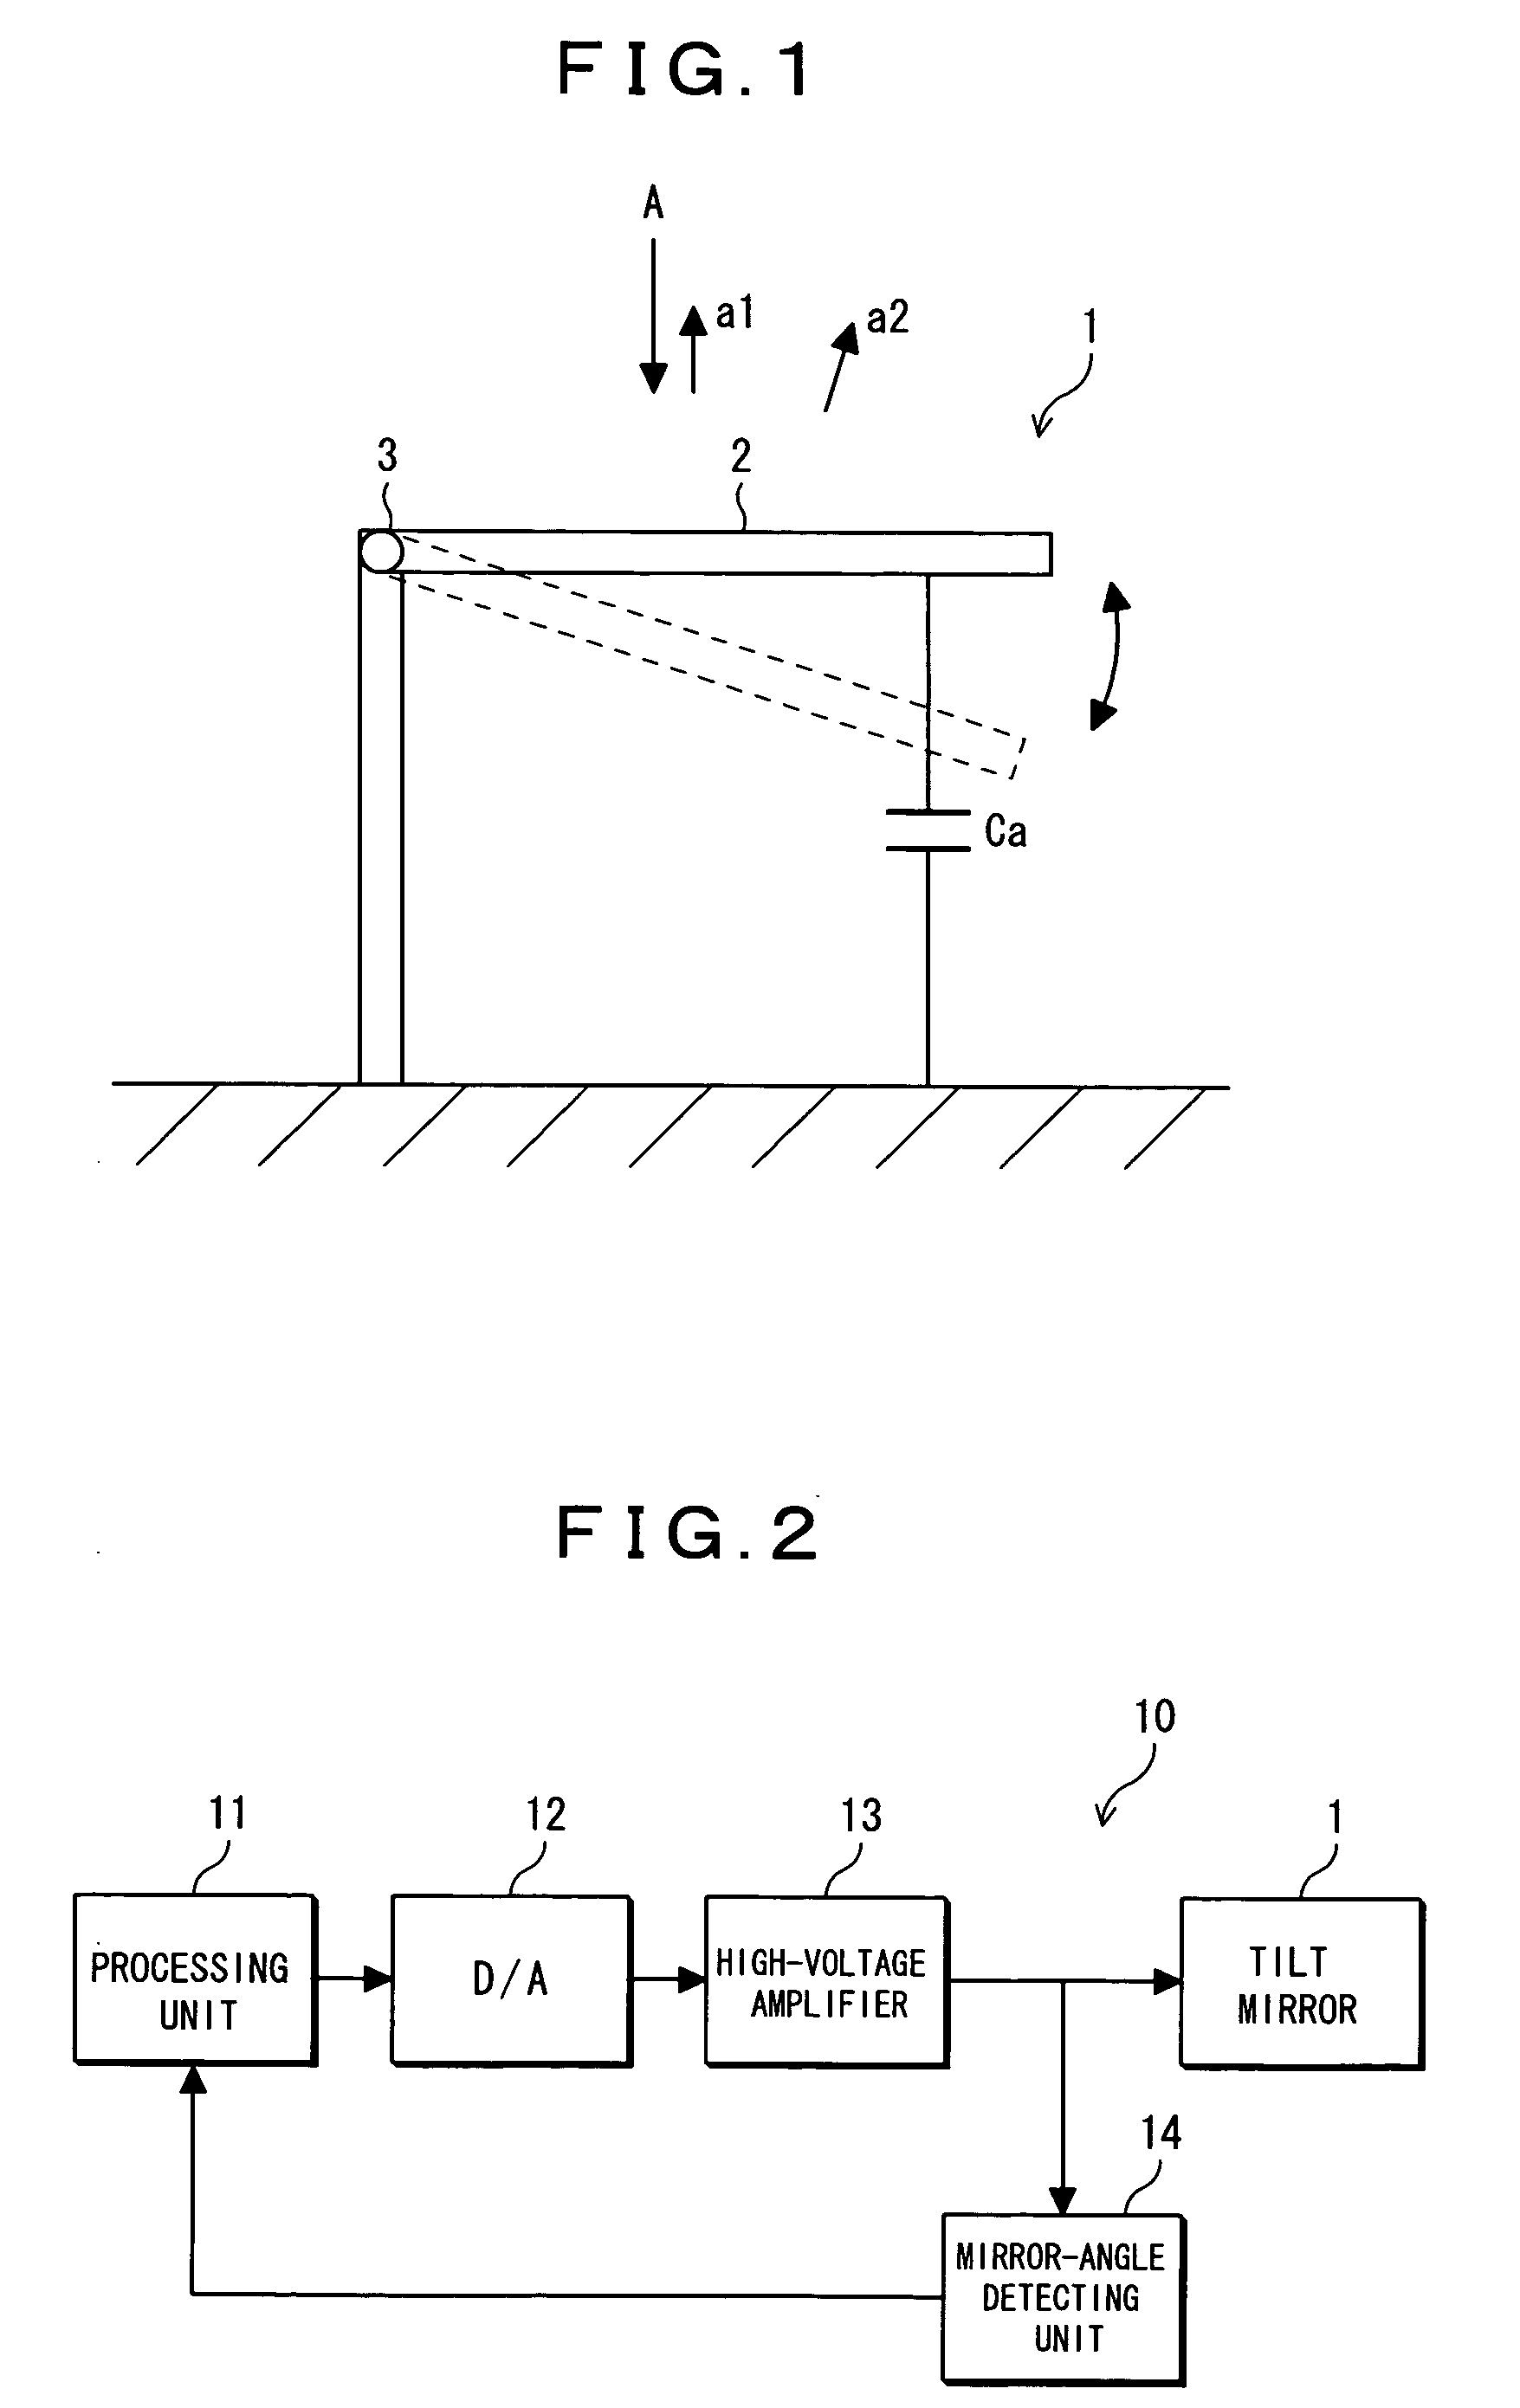 Optical switch controller and movable body controller